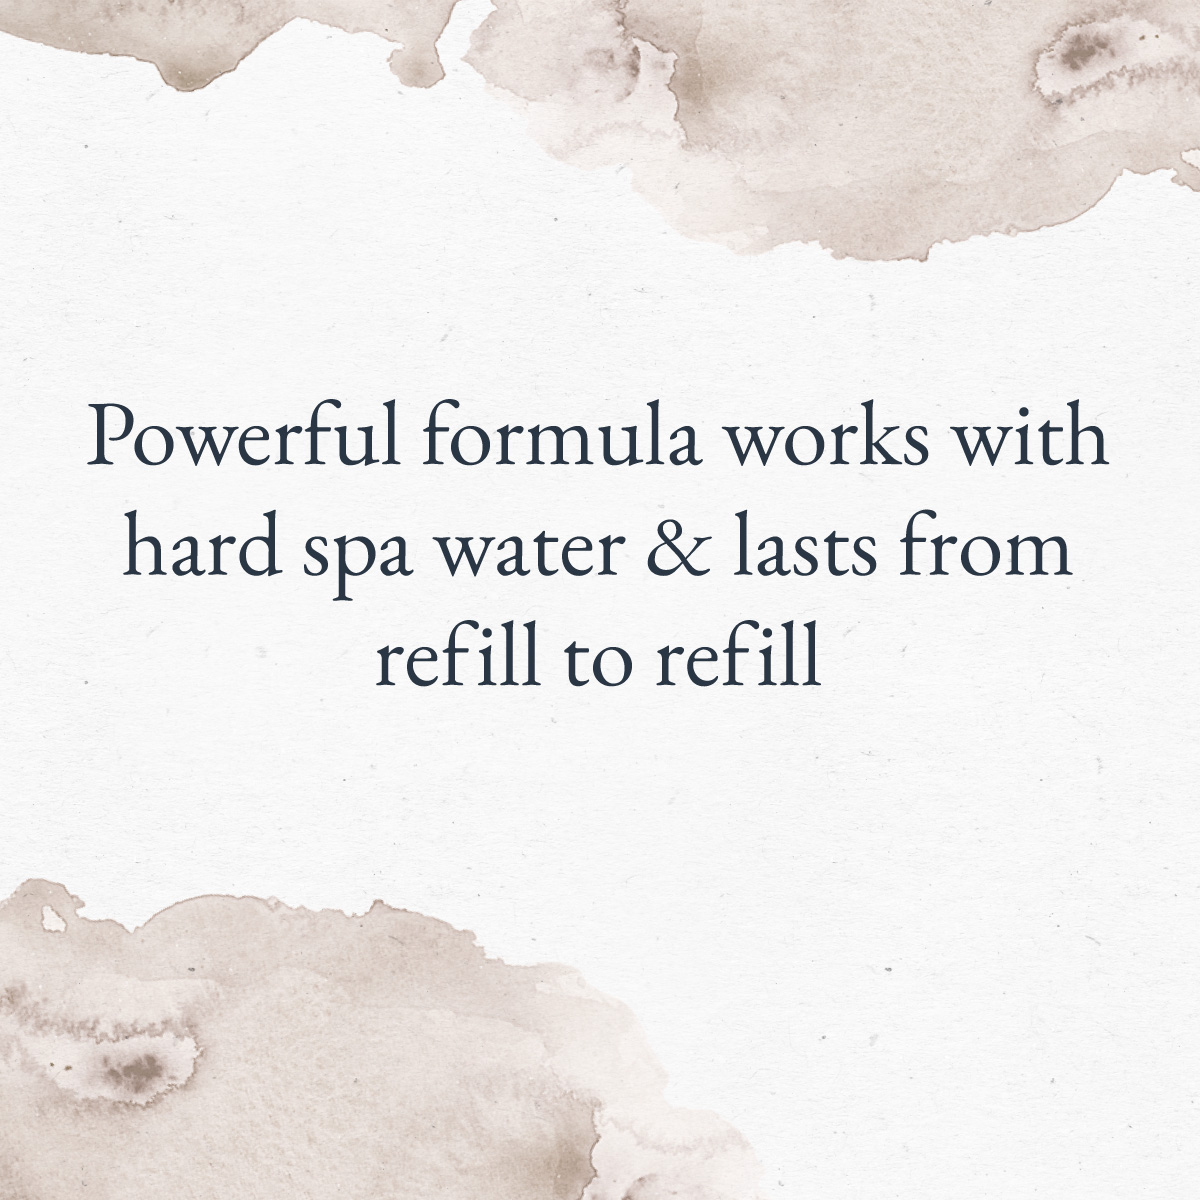 formula works with hard spa water